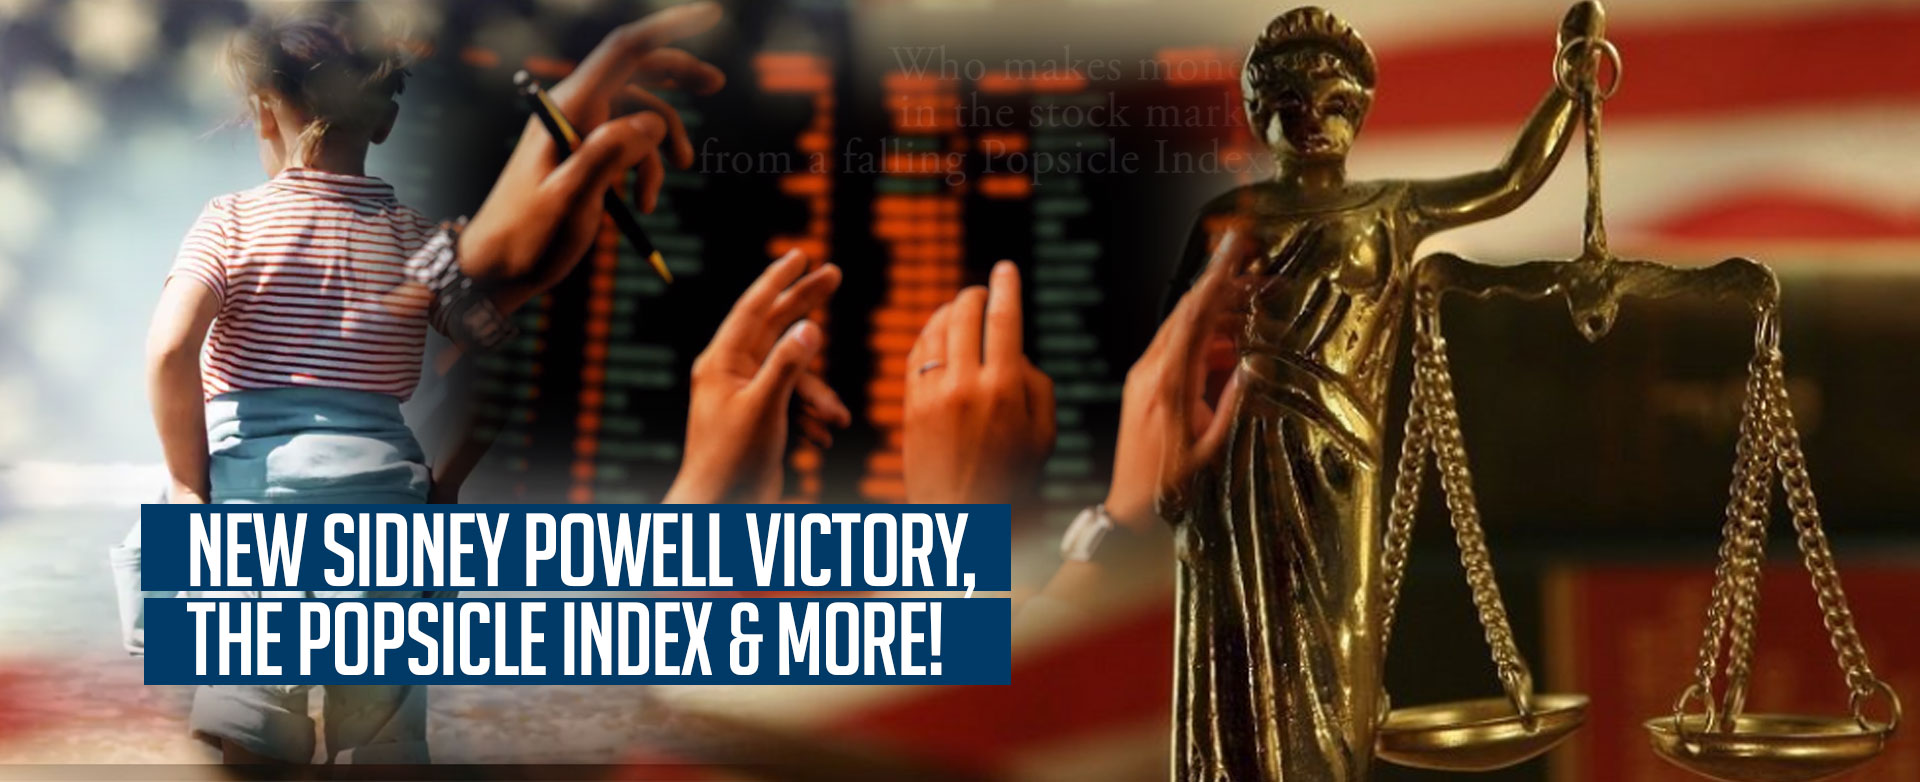 MyPatriotsNetwork-New Sidney Powell Victory, The Popsicle Index & More! March 2, 2021 Update